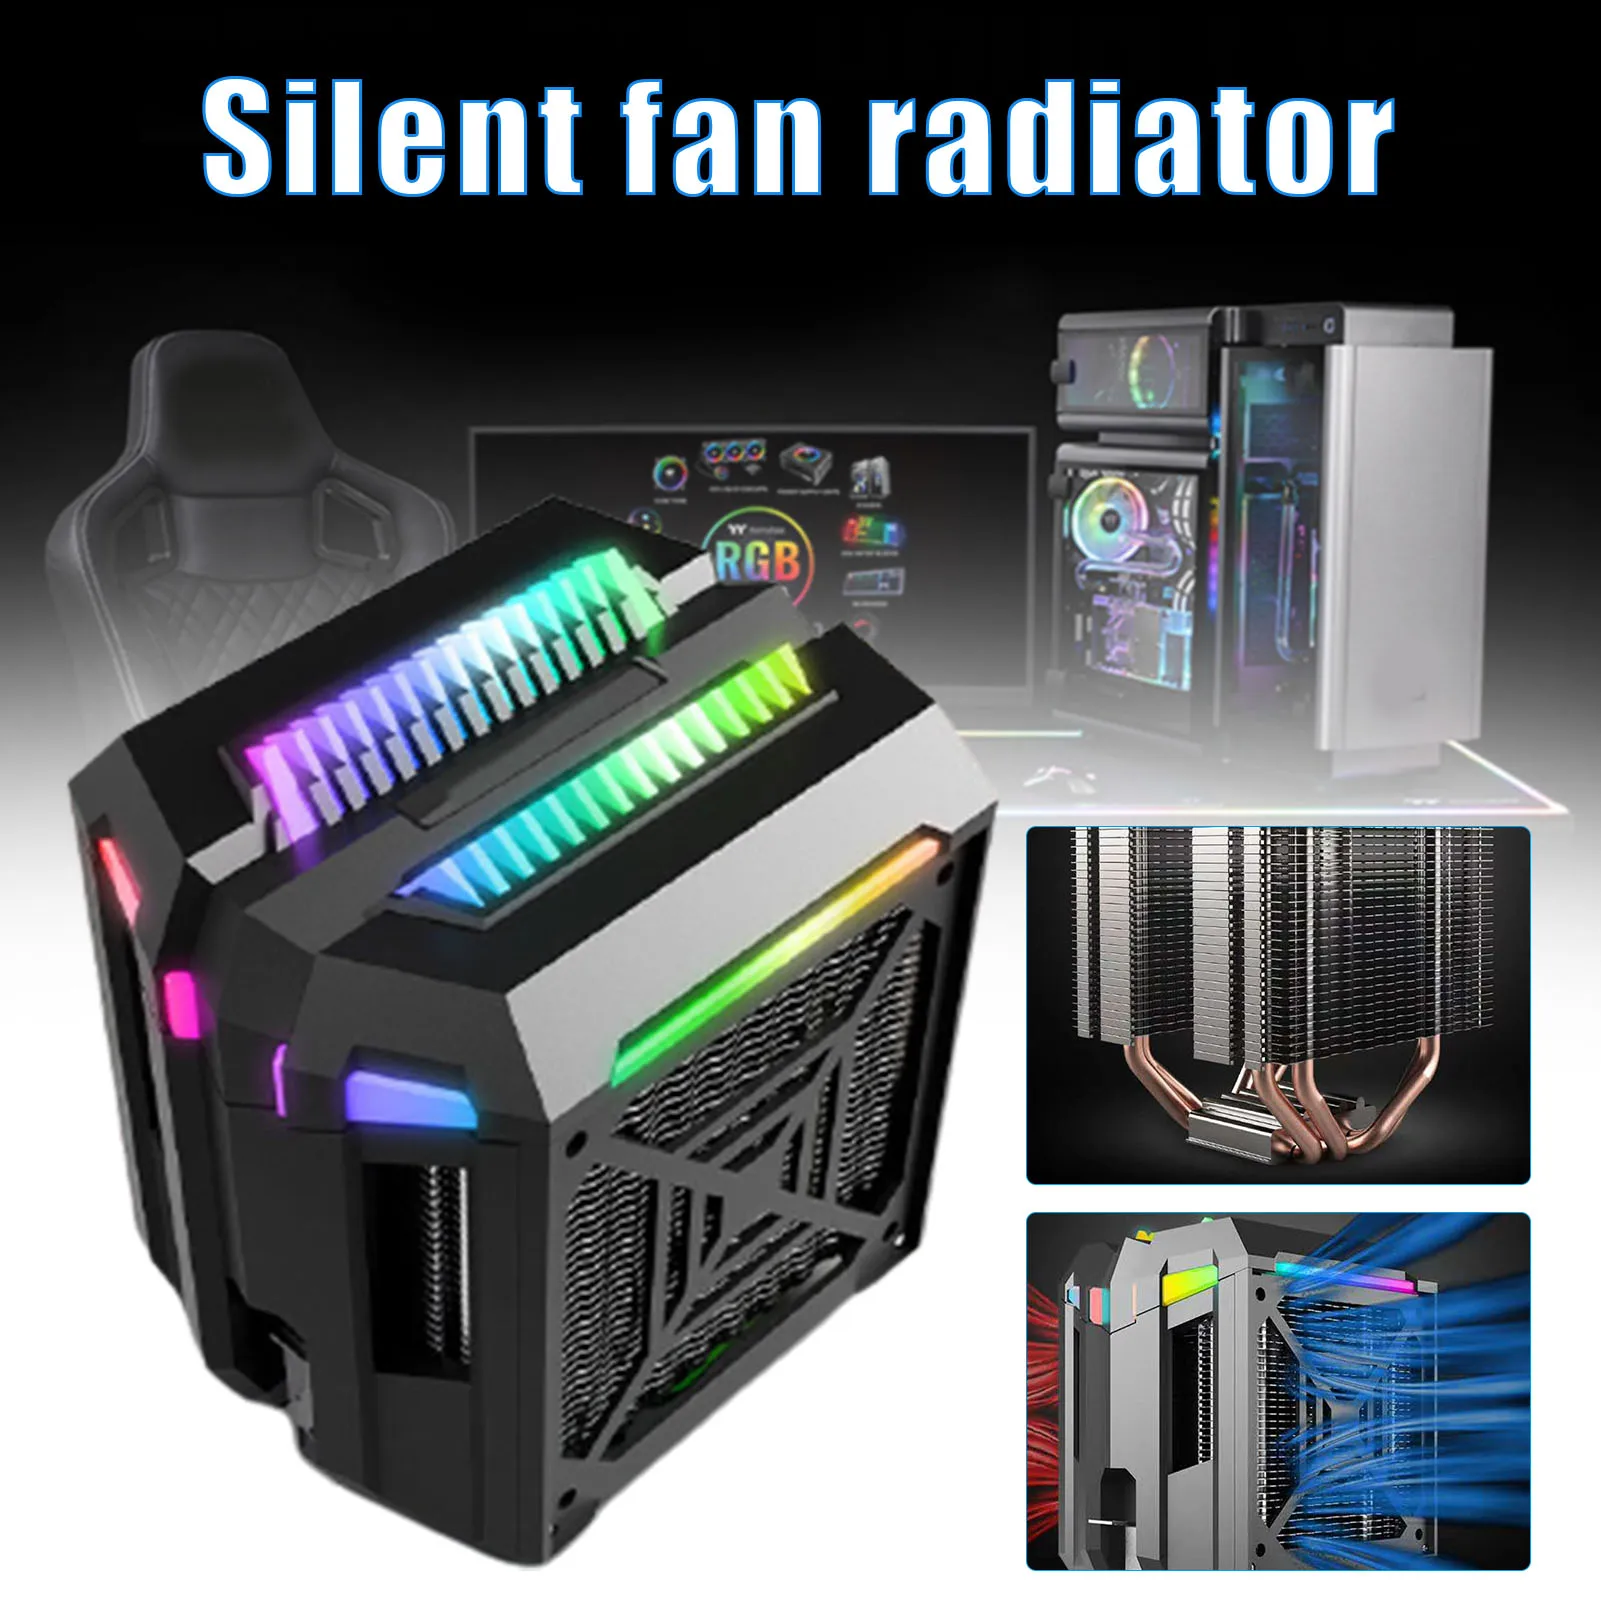 

4 Heat Pipes CPU Cooler Glowing Silent Chassis Cooling Fan for Desktop Computer Practical Computer Accessories Cooling Radiator